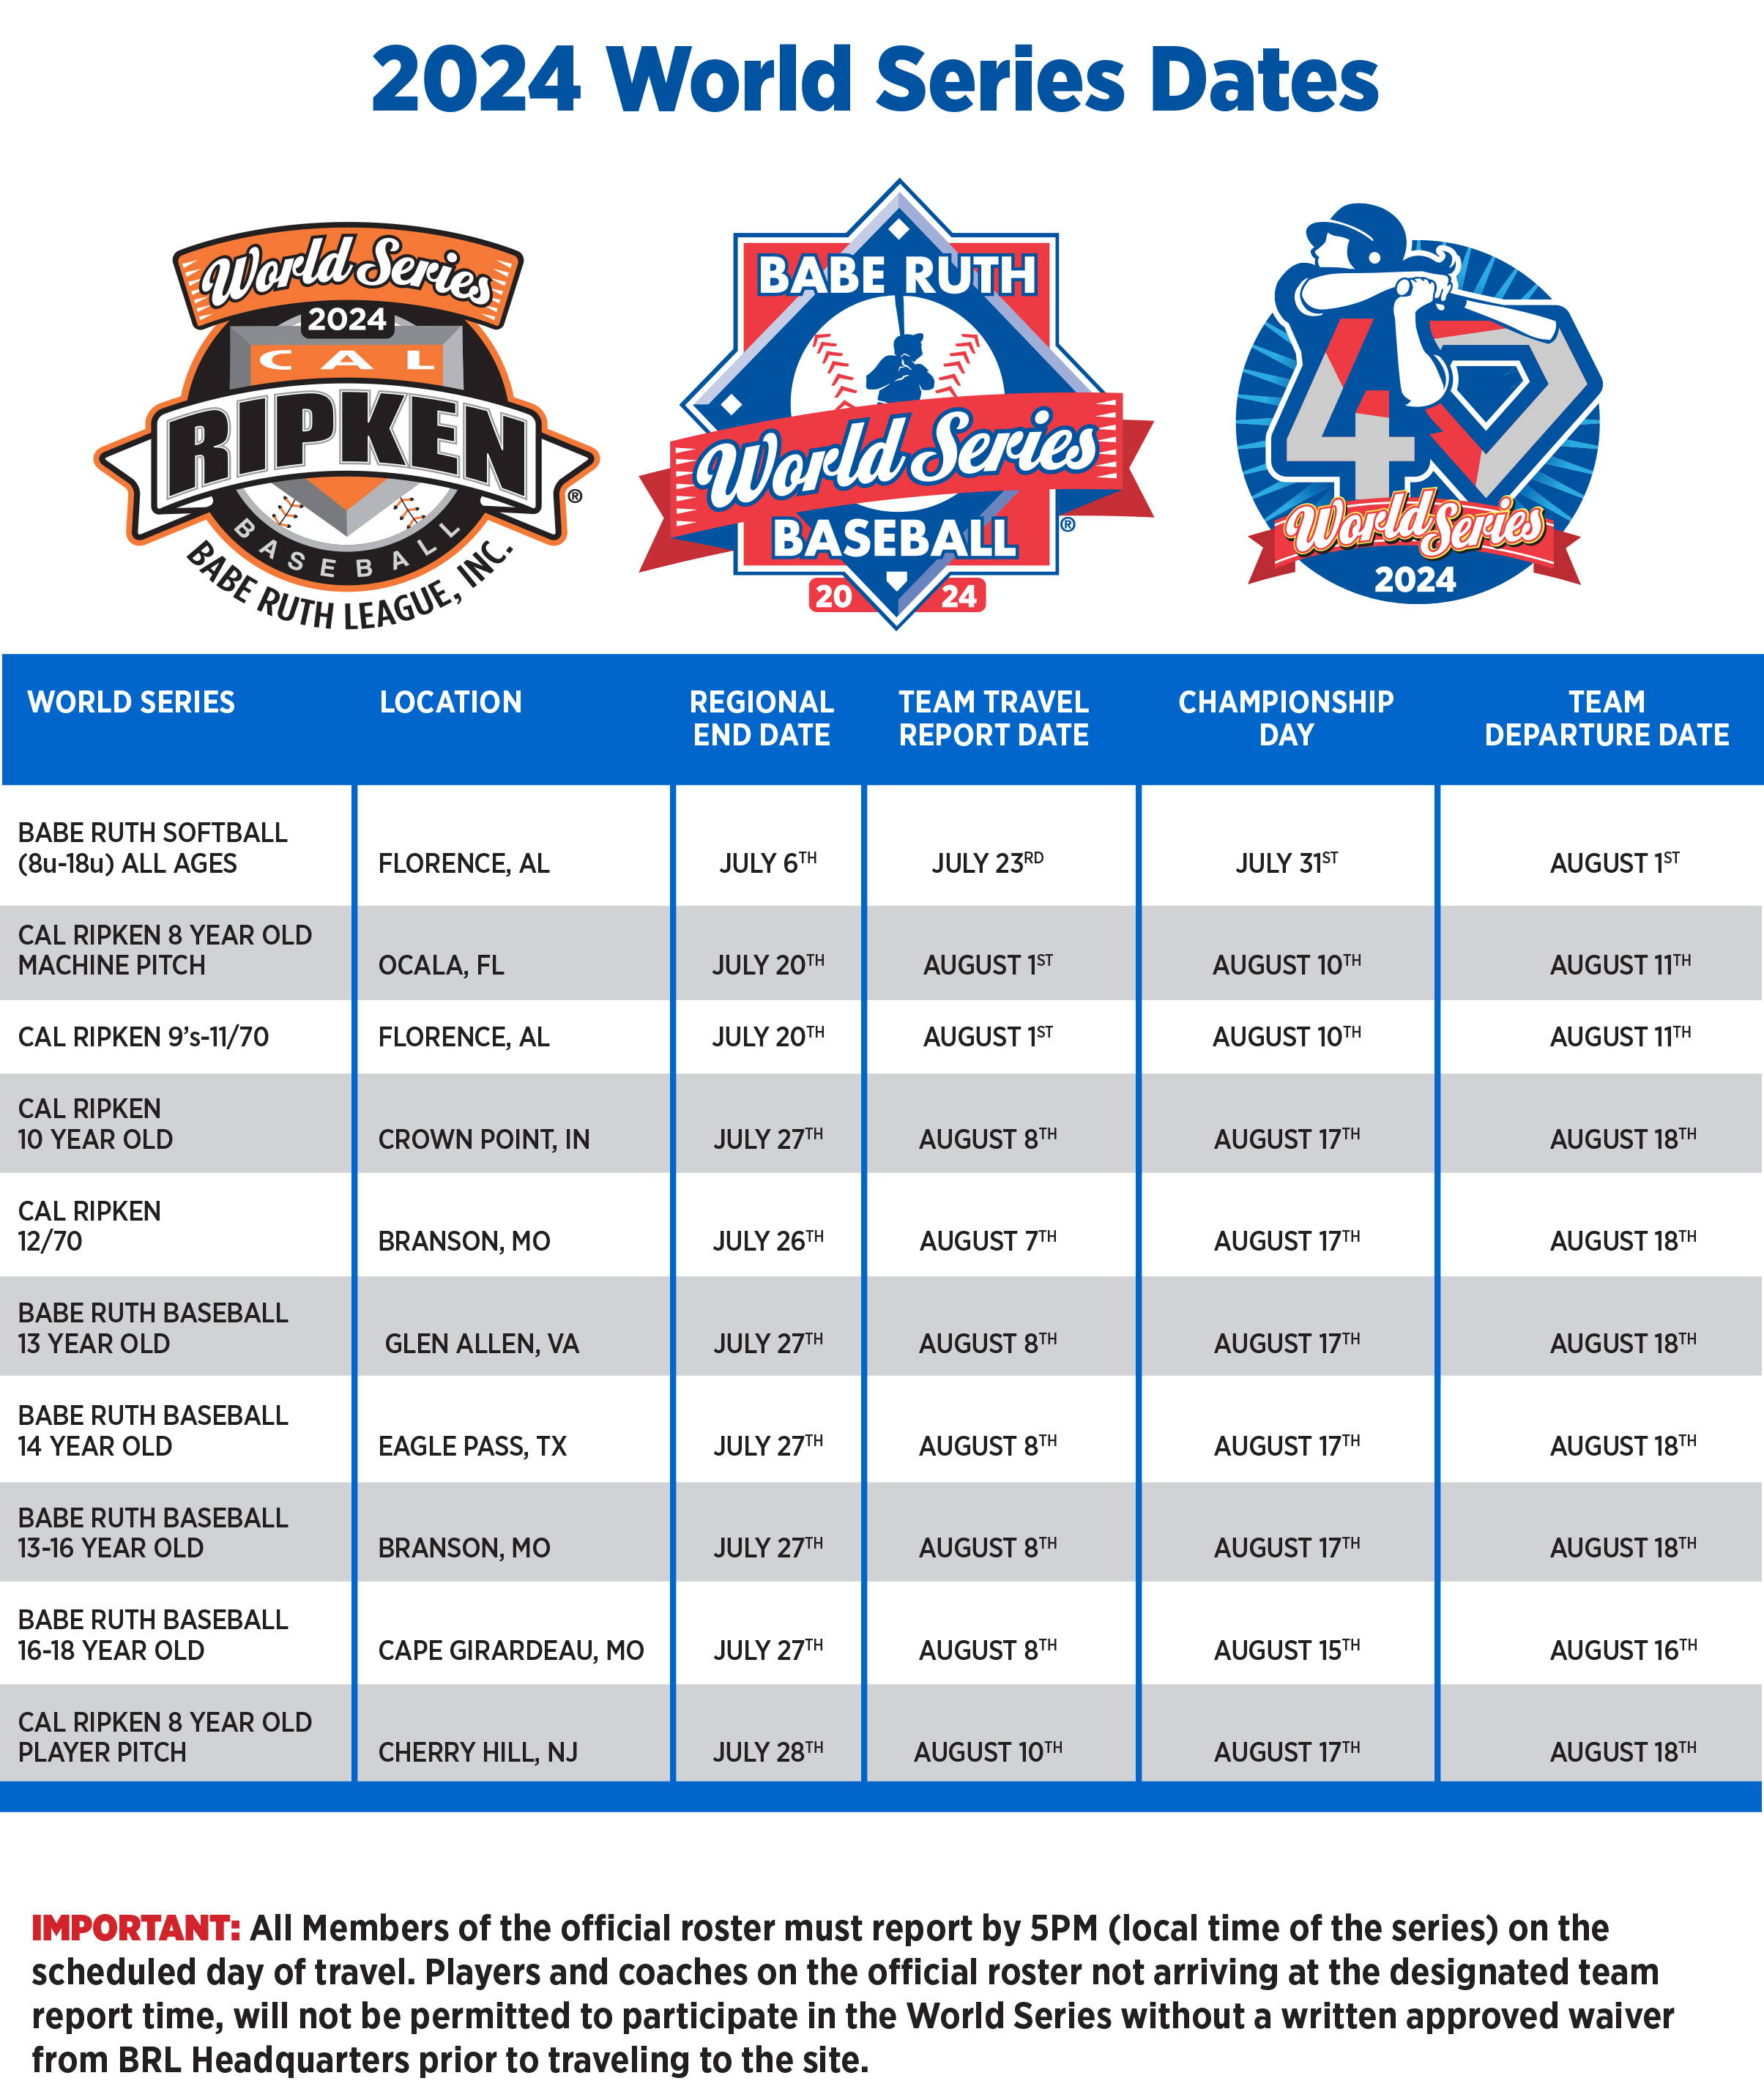 2024 World Series Dates and Locations: A Blend of Legacy and